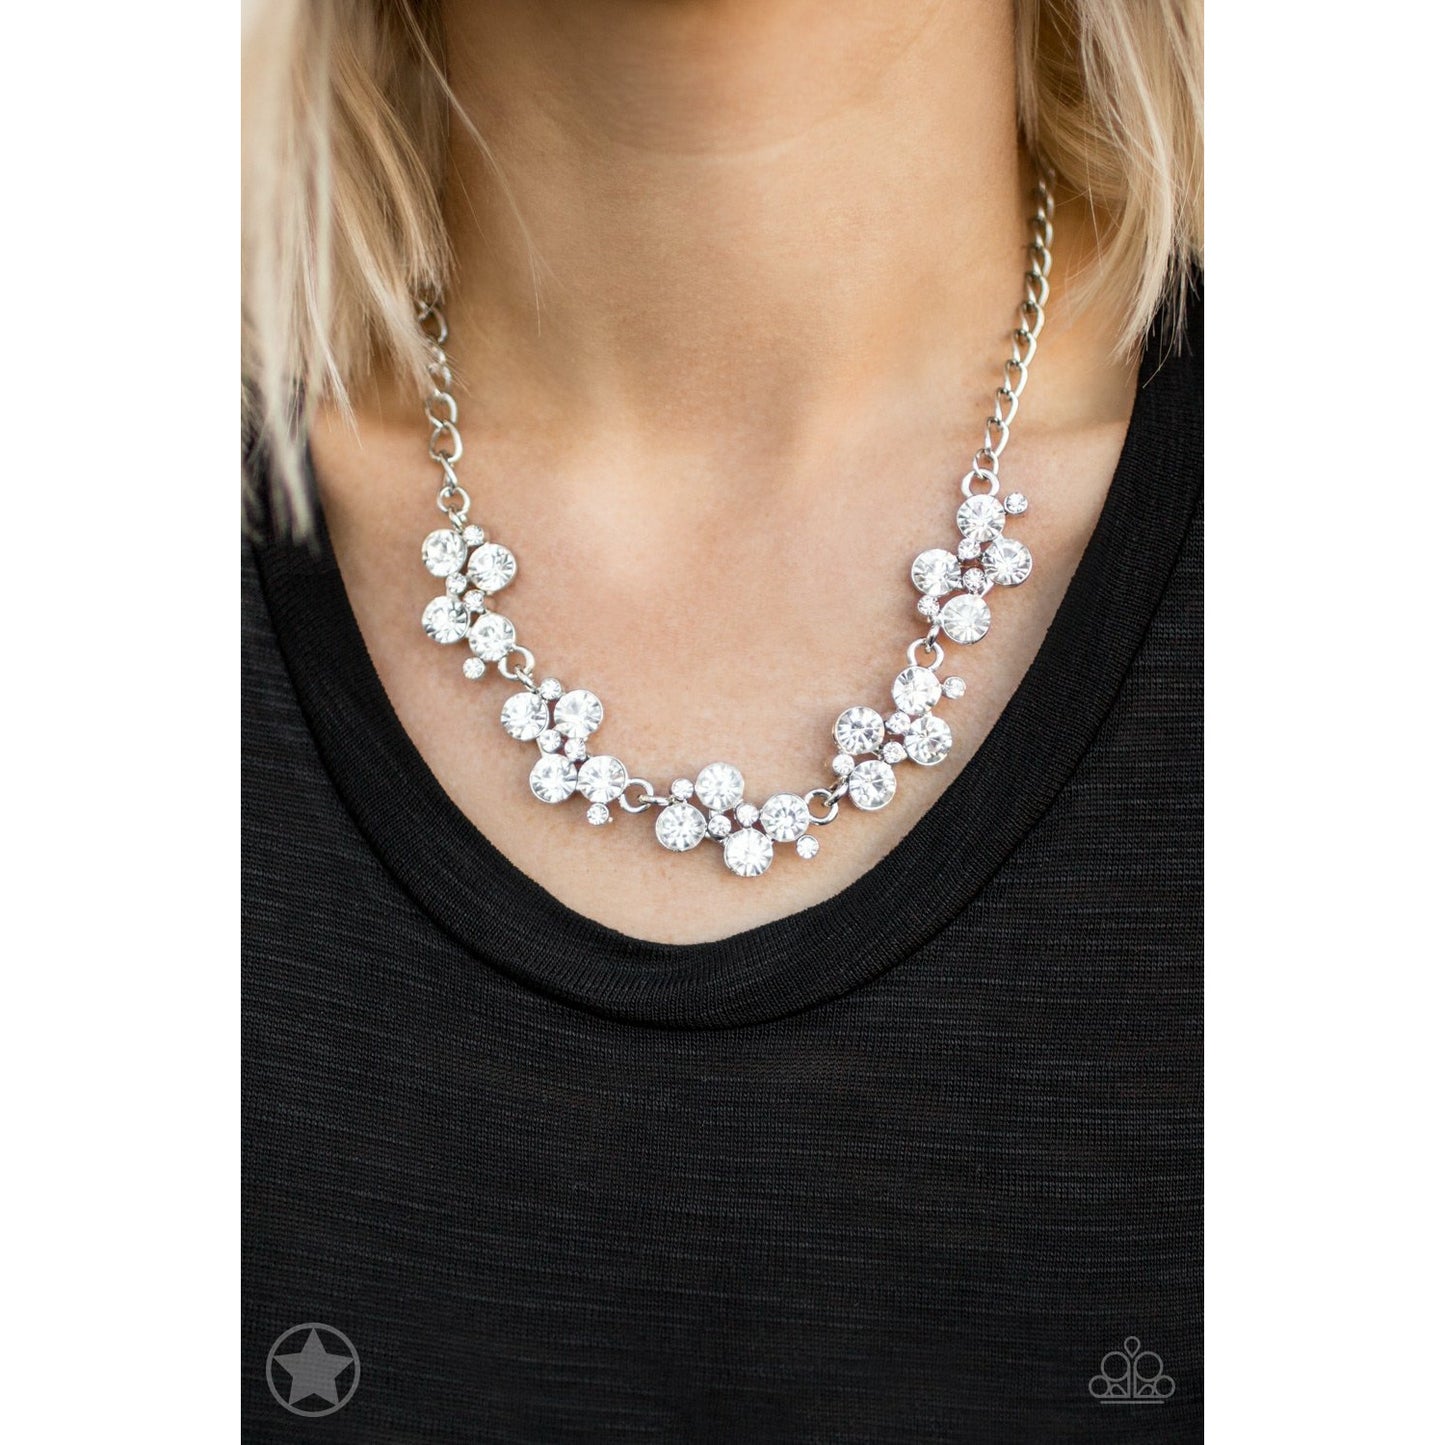 Hollywood Hills fashion necklace